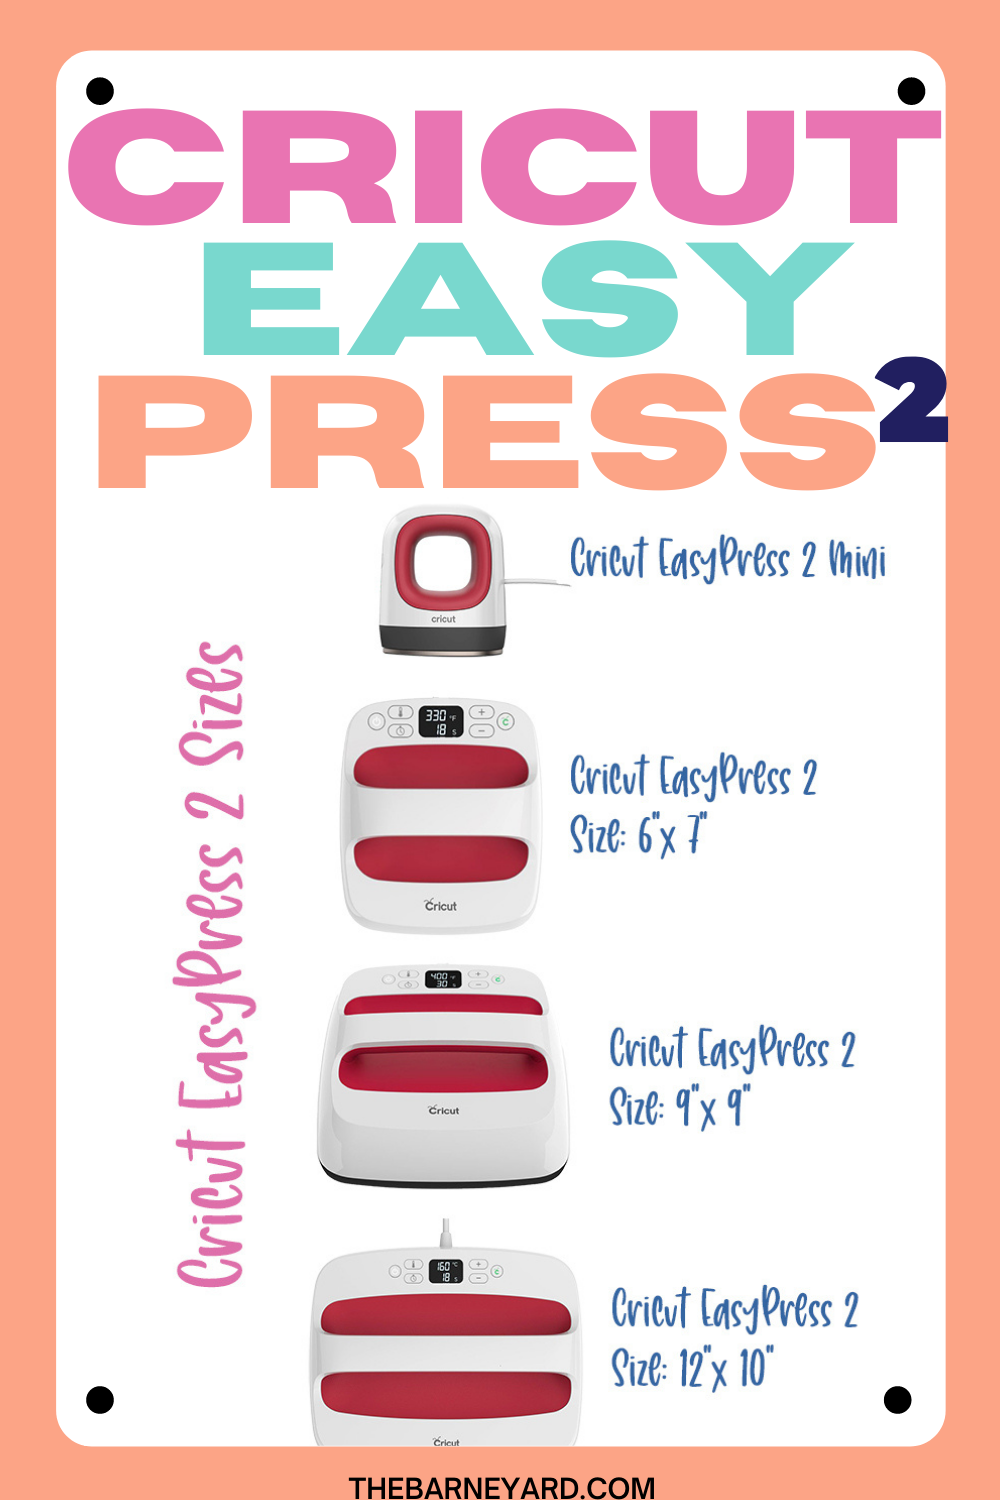 Which Cricut EasyPress 2 should I buy?